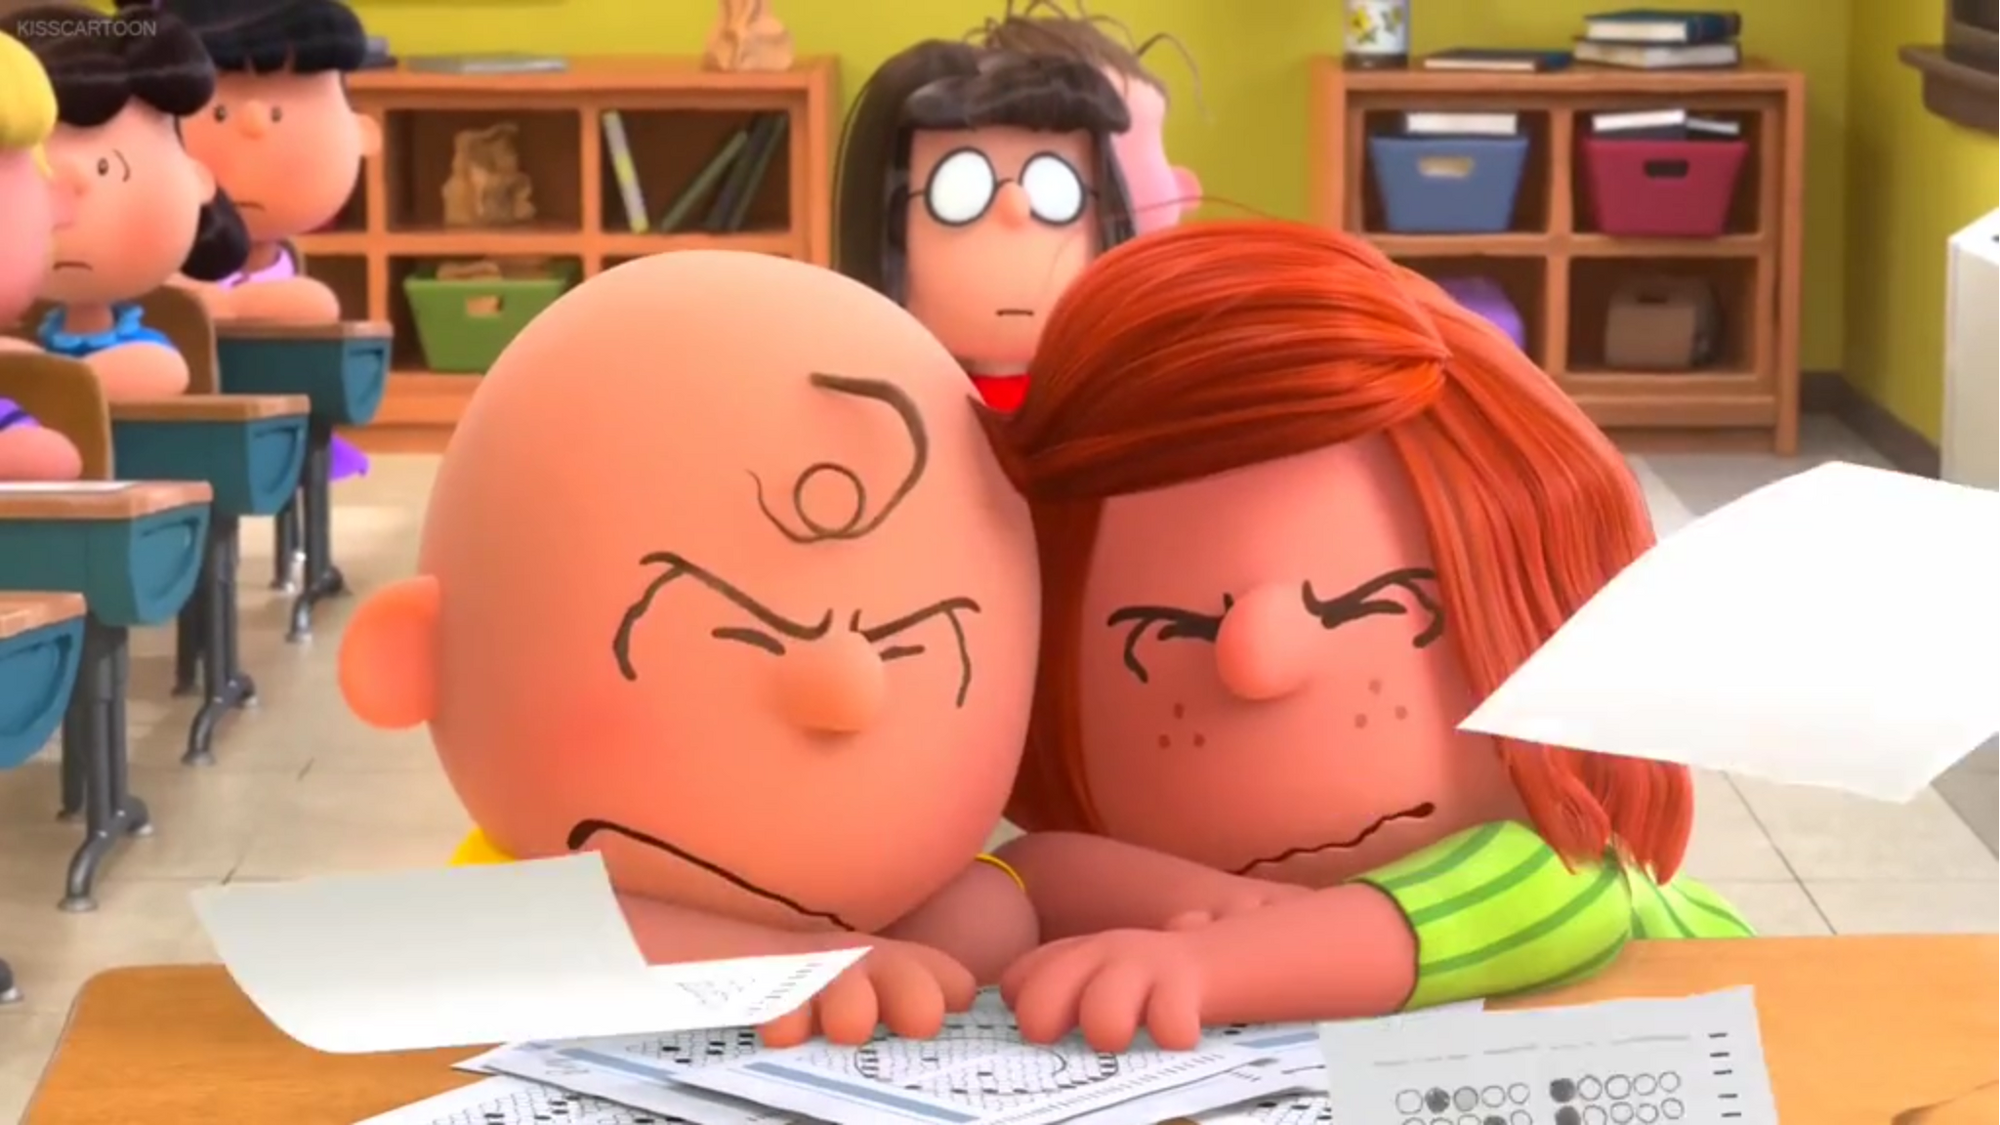 Image Charlie Brown And Peppermint Patty Slamming Their Paper On The Teacher S Desk Png